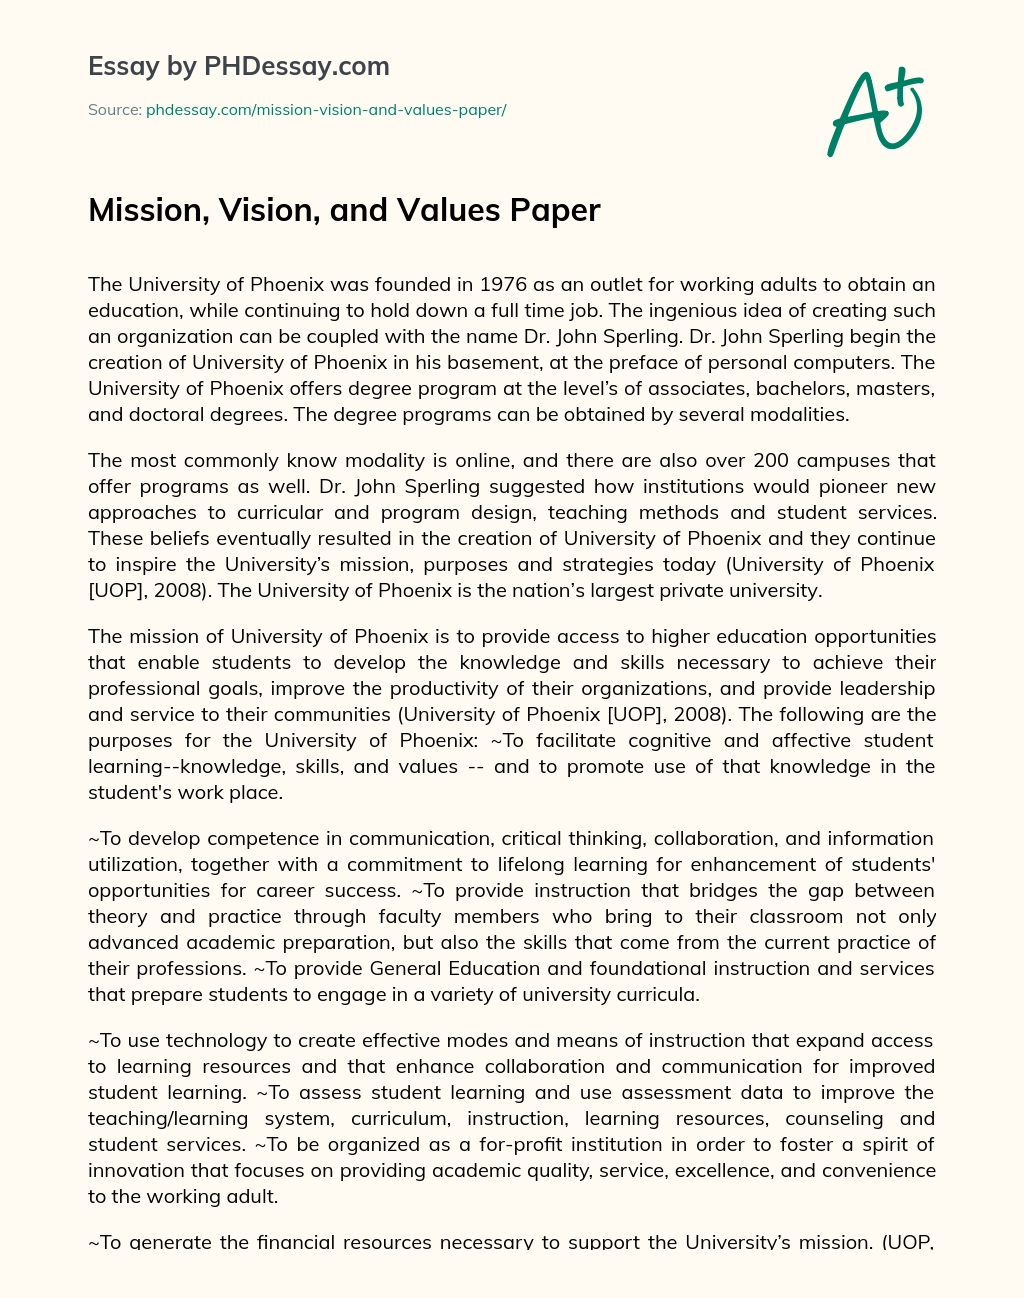 Mission, Vision, and Values Paper essay